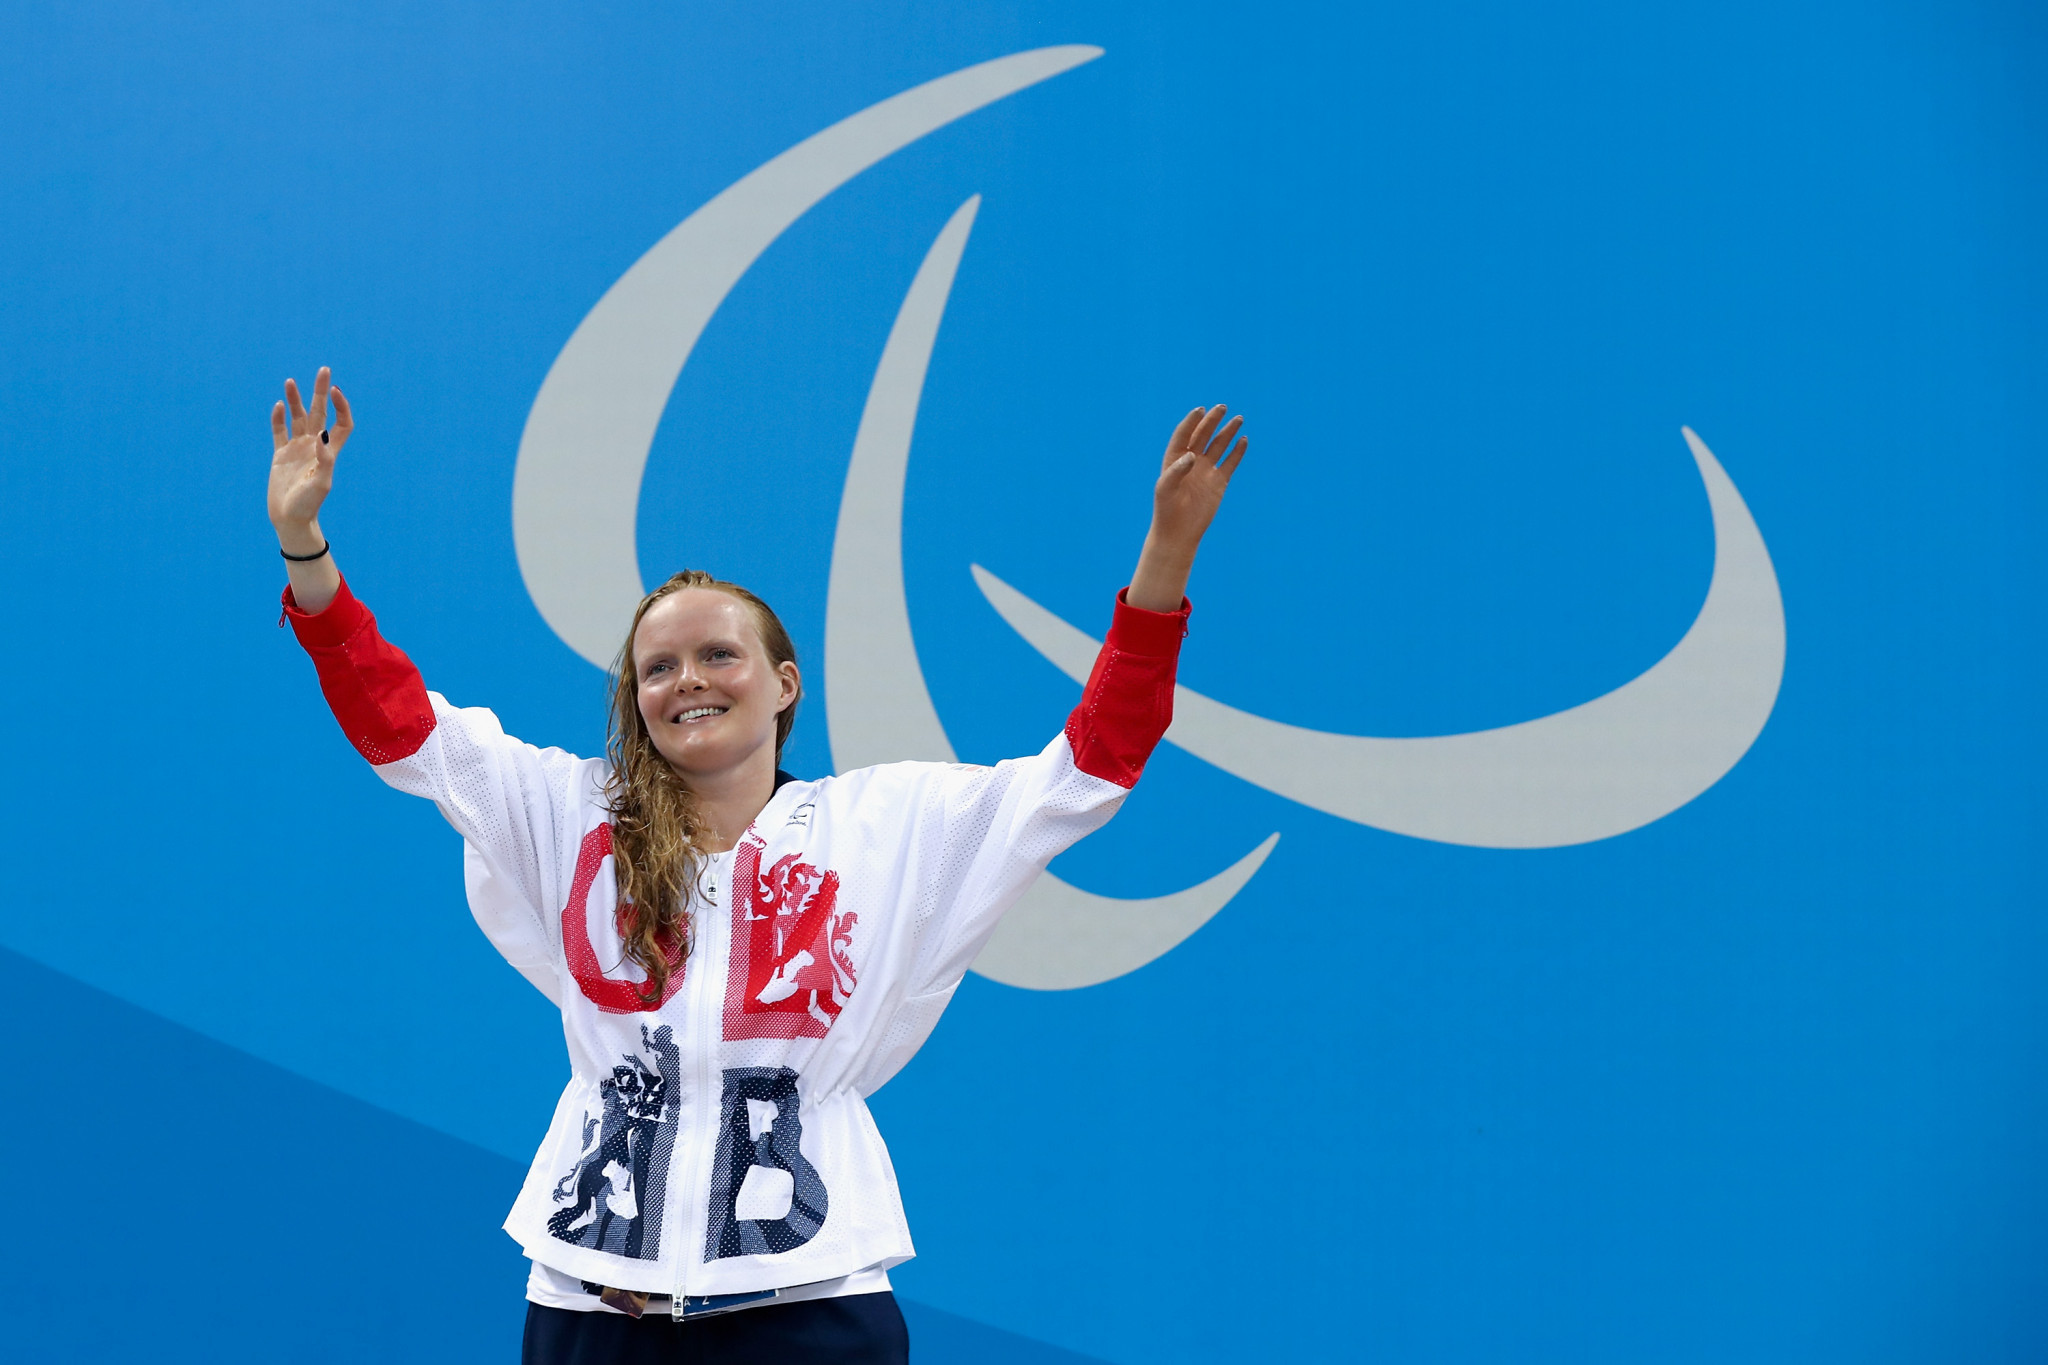 UK Minister meets British Paralympians and opens new research lab at Queen Elizabeth Olympic Park